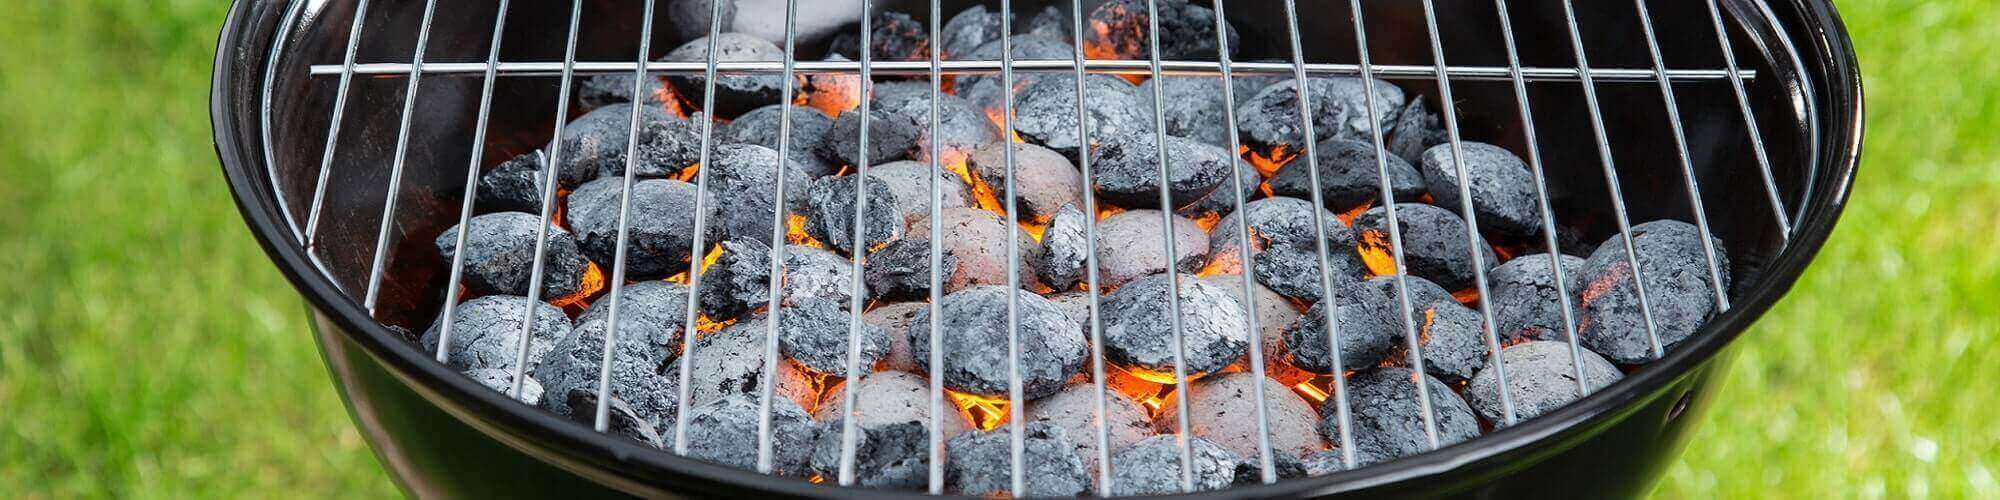 Charcoal Grill Keep Going Out? 5 Tips to Keep A Hot Flame